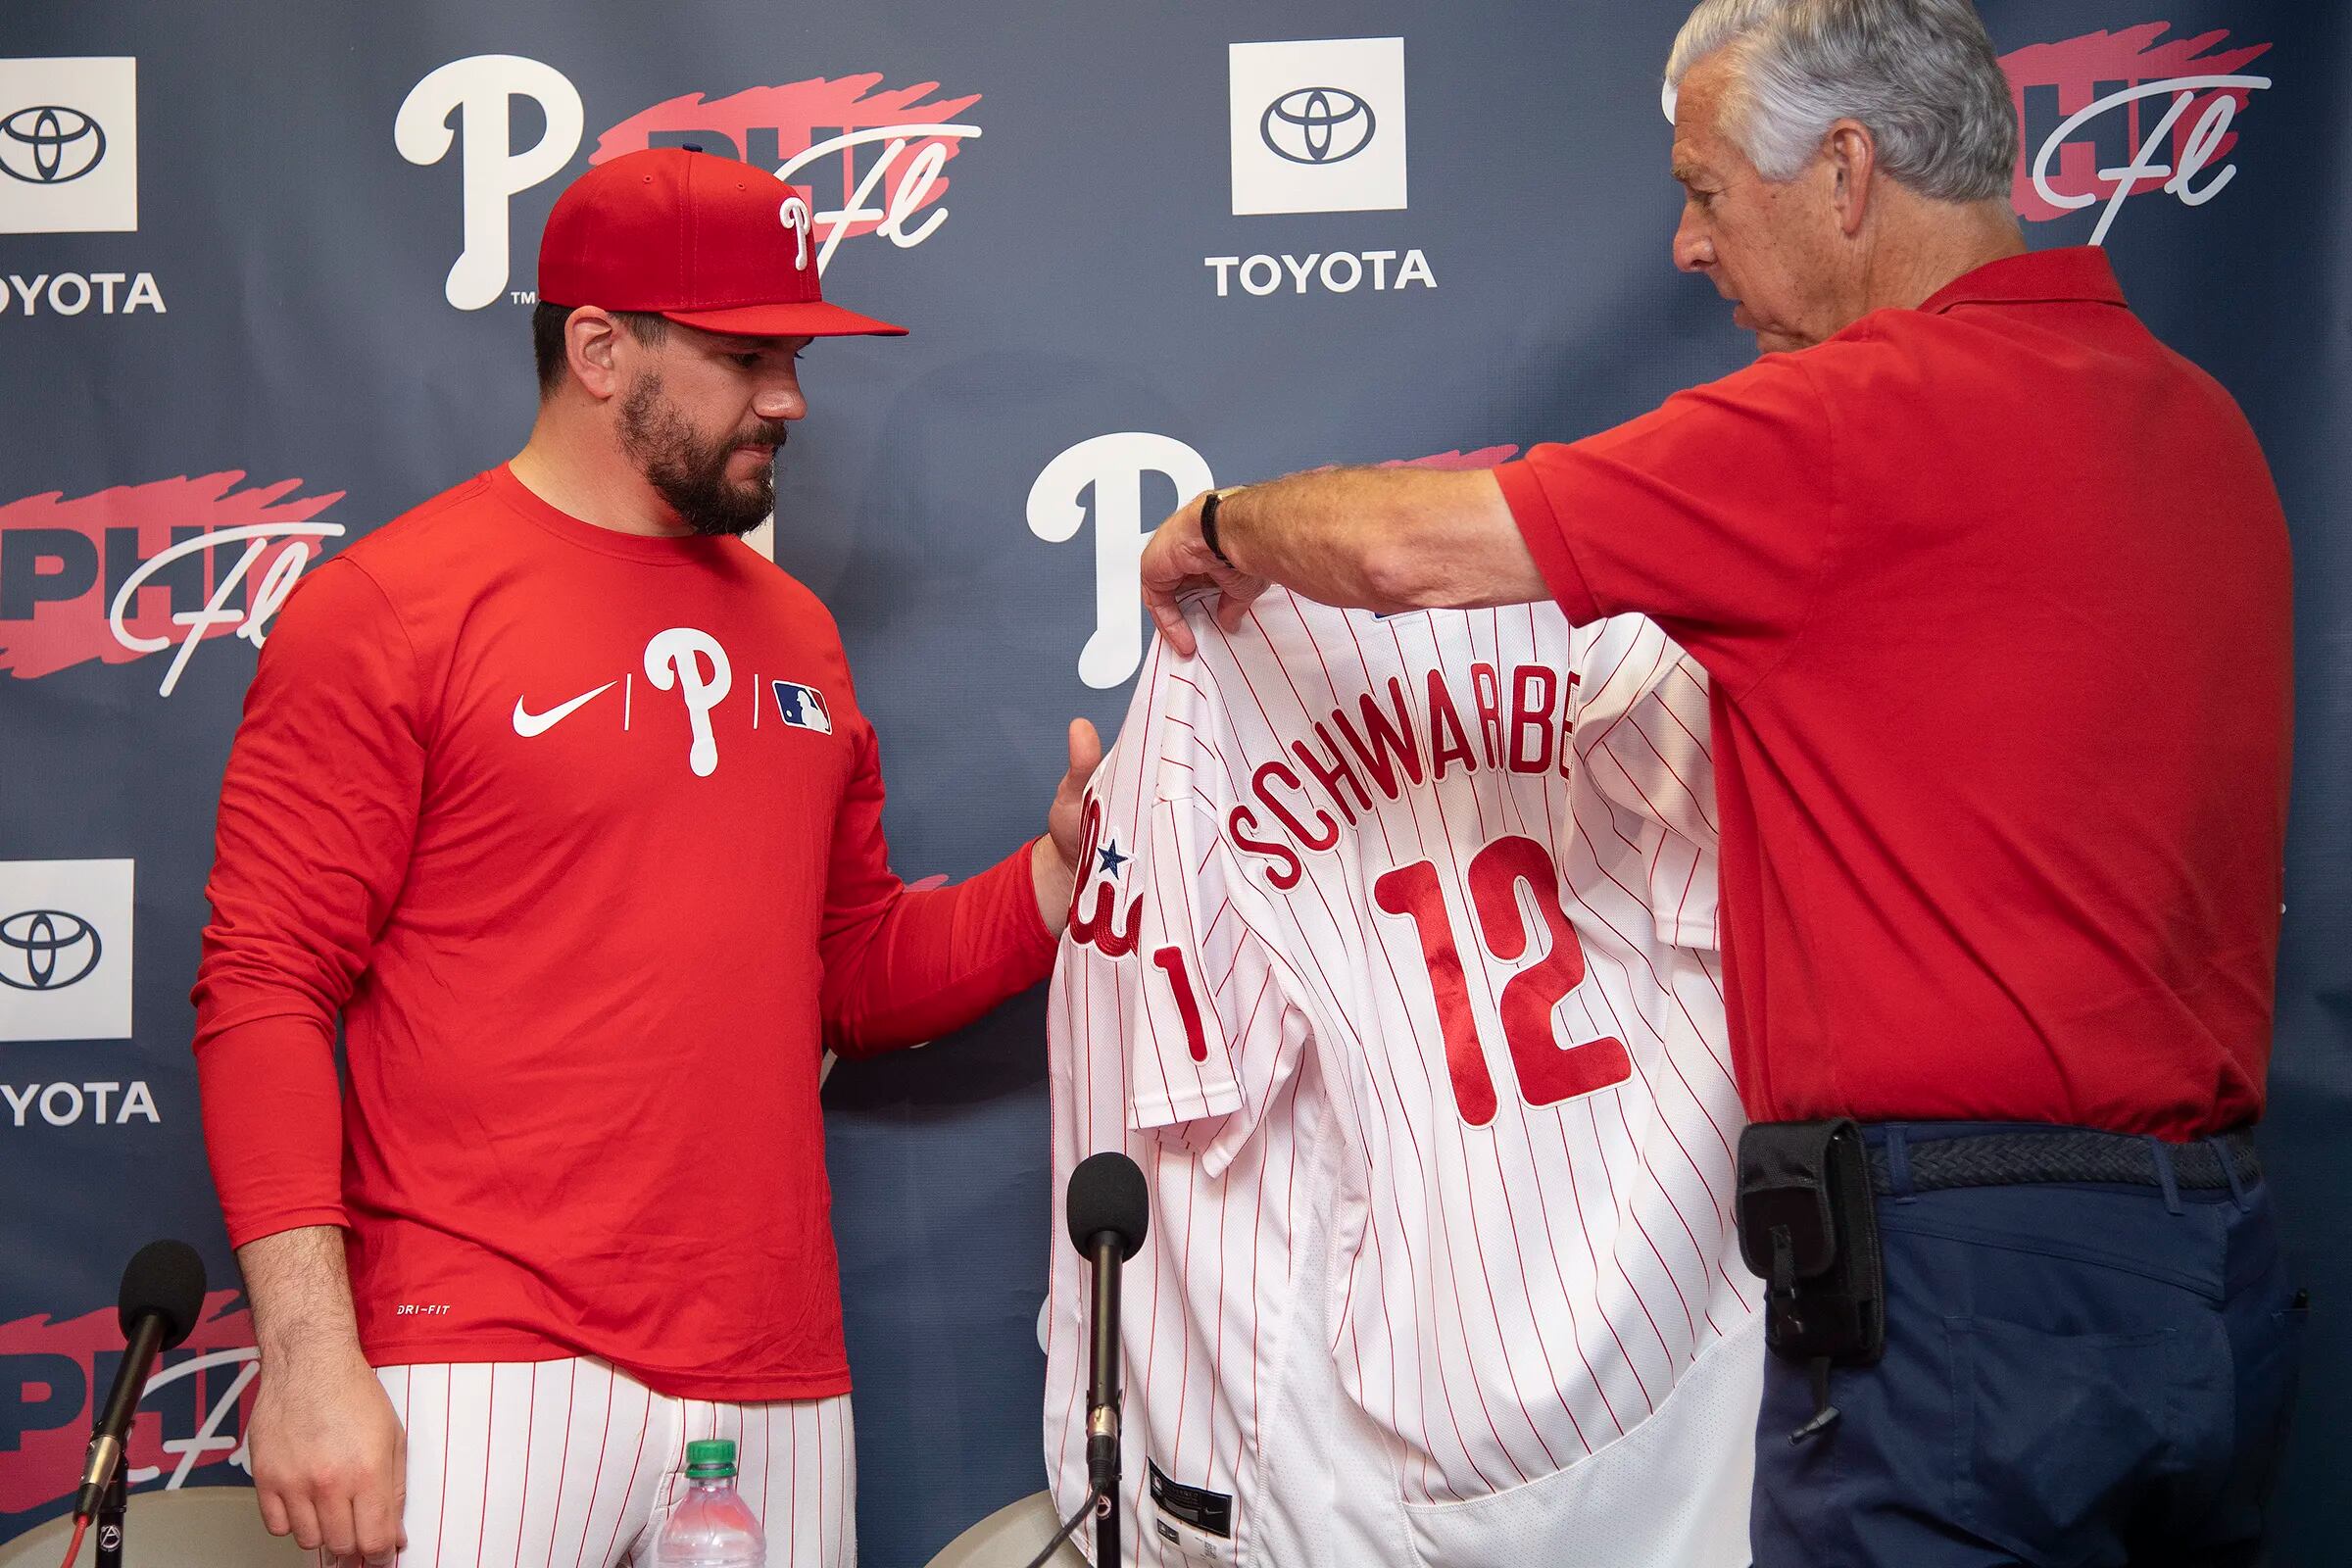 Washington Nationals: Kyle Schwarber's potential justifies the contract